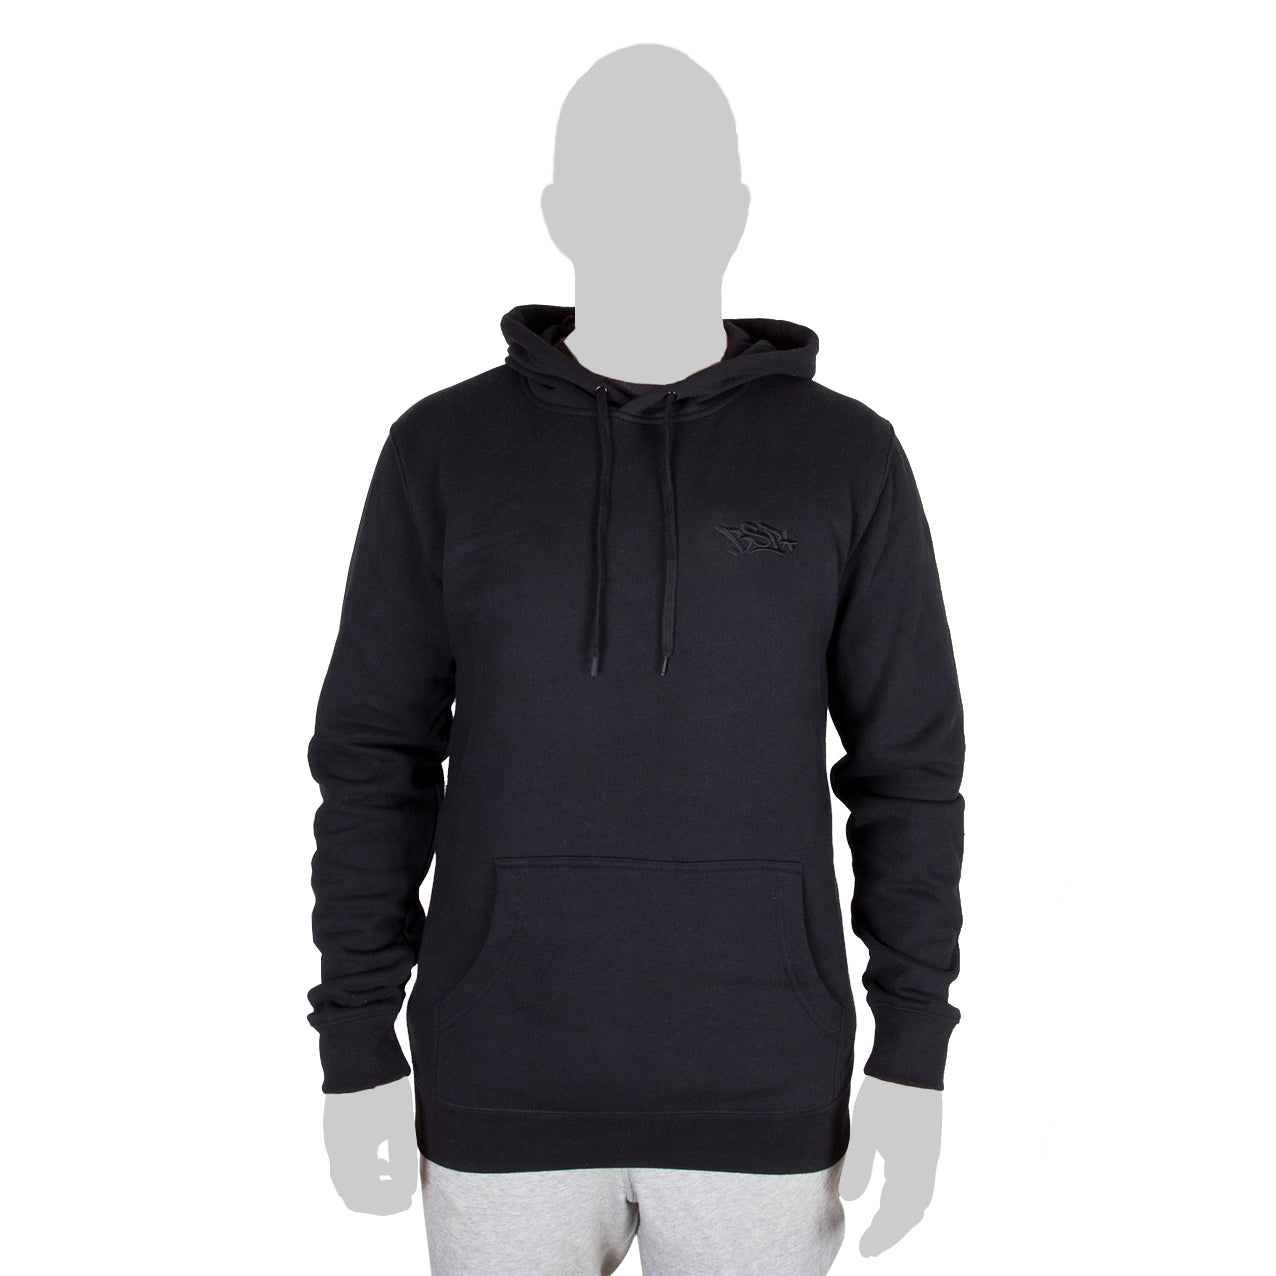 hoodie with built in face mask